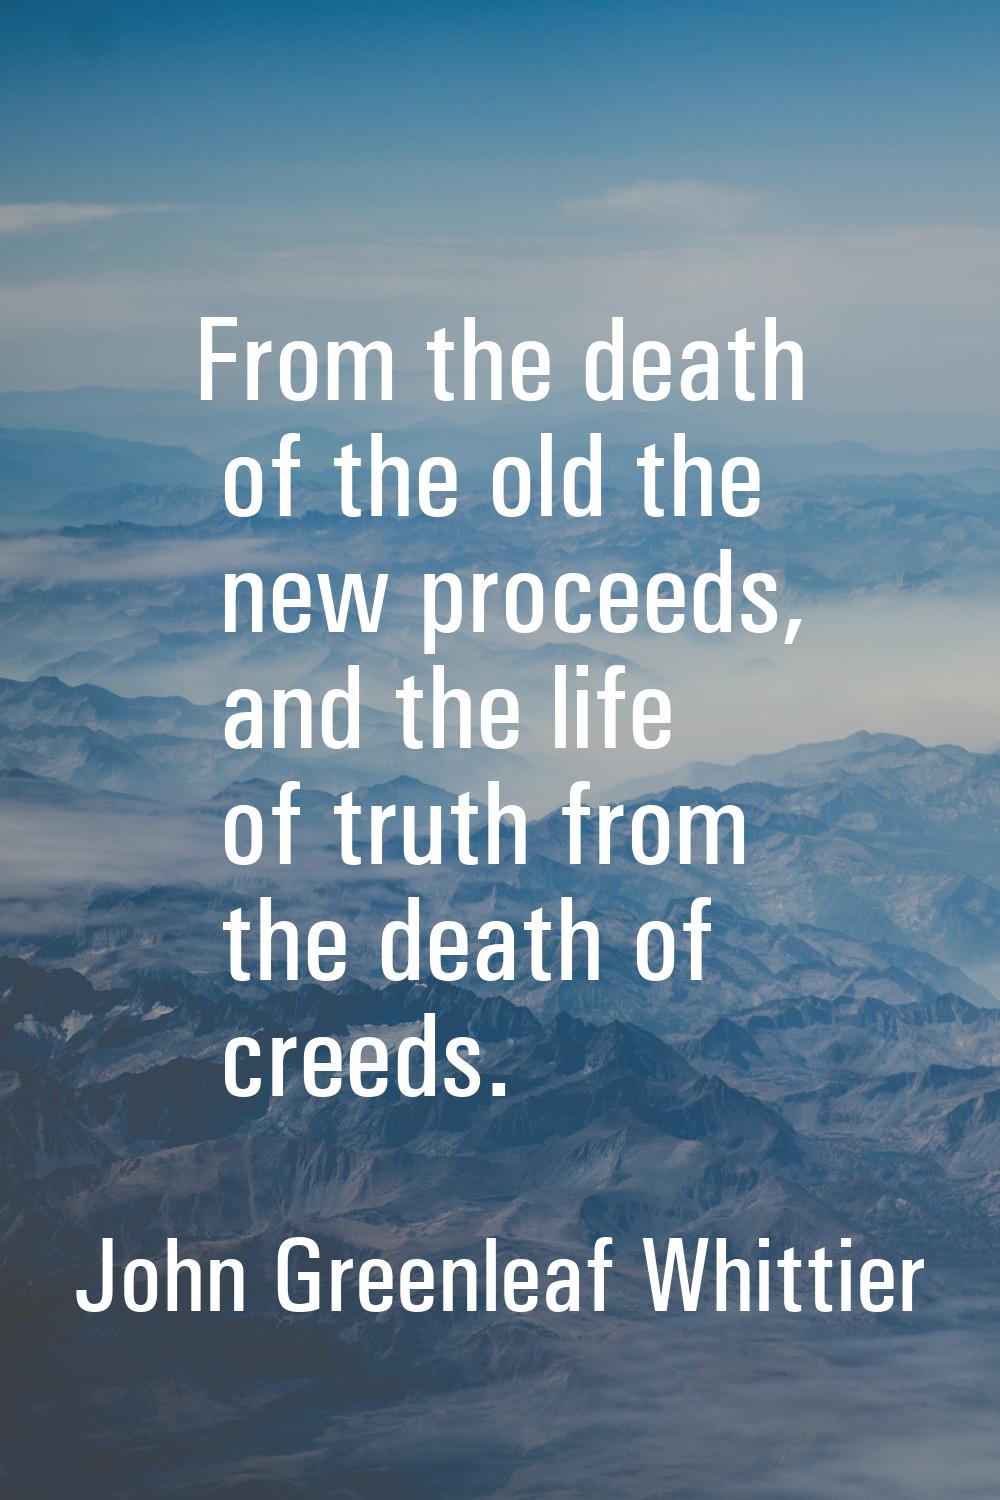 From the death of the old the new proceeds, and the life of truth from the death of creeds.